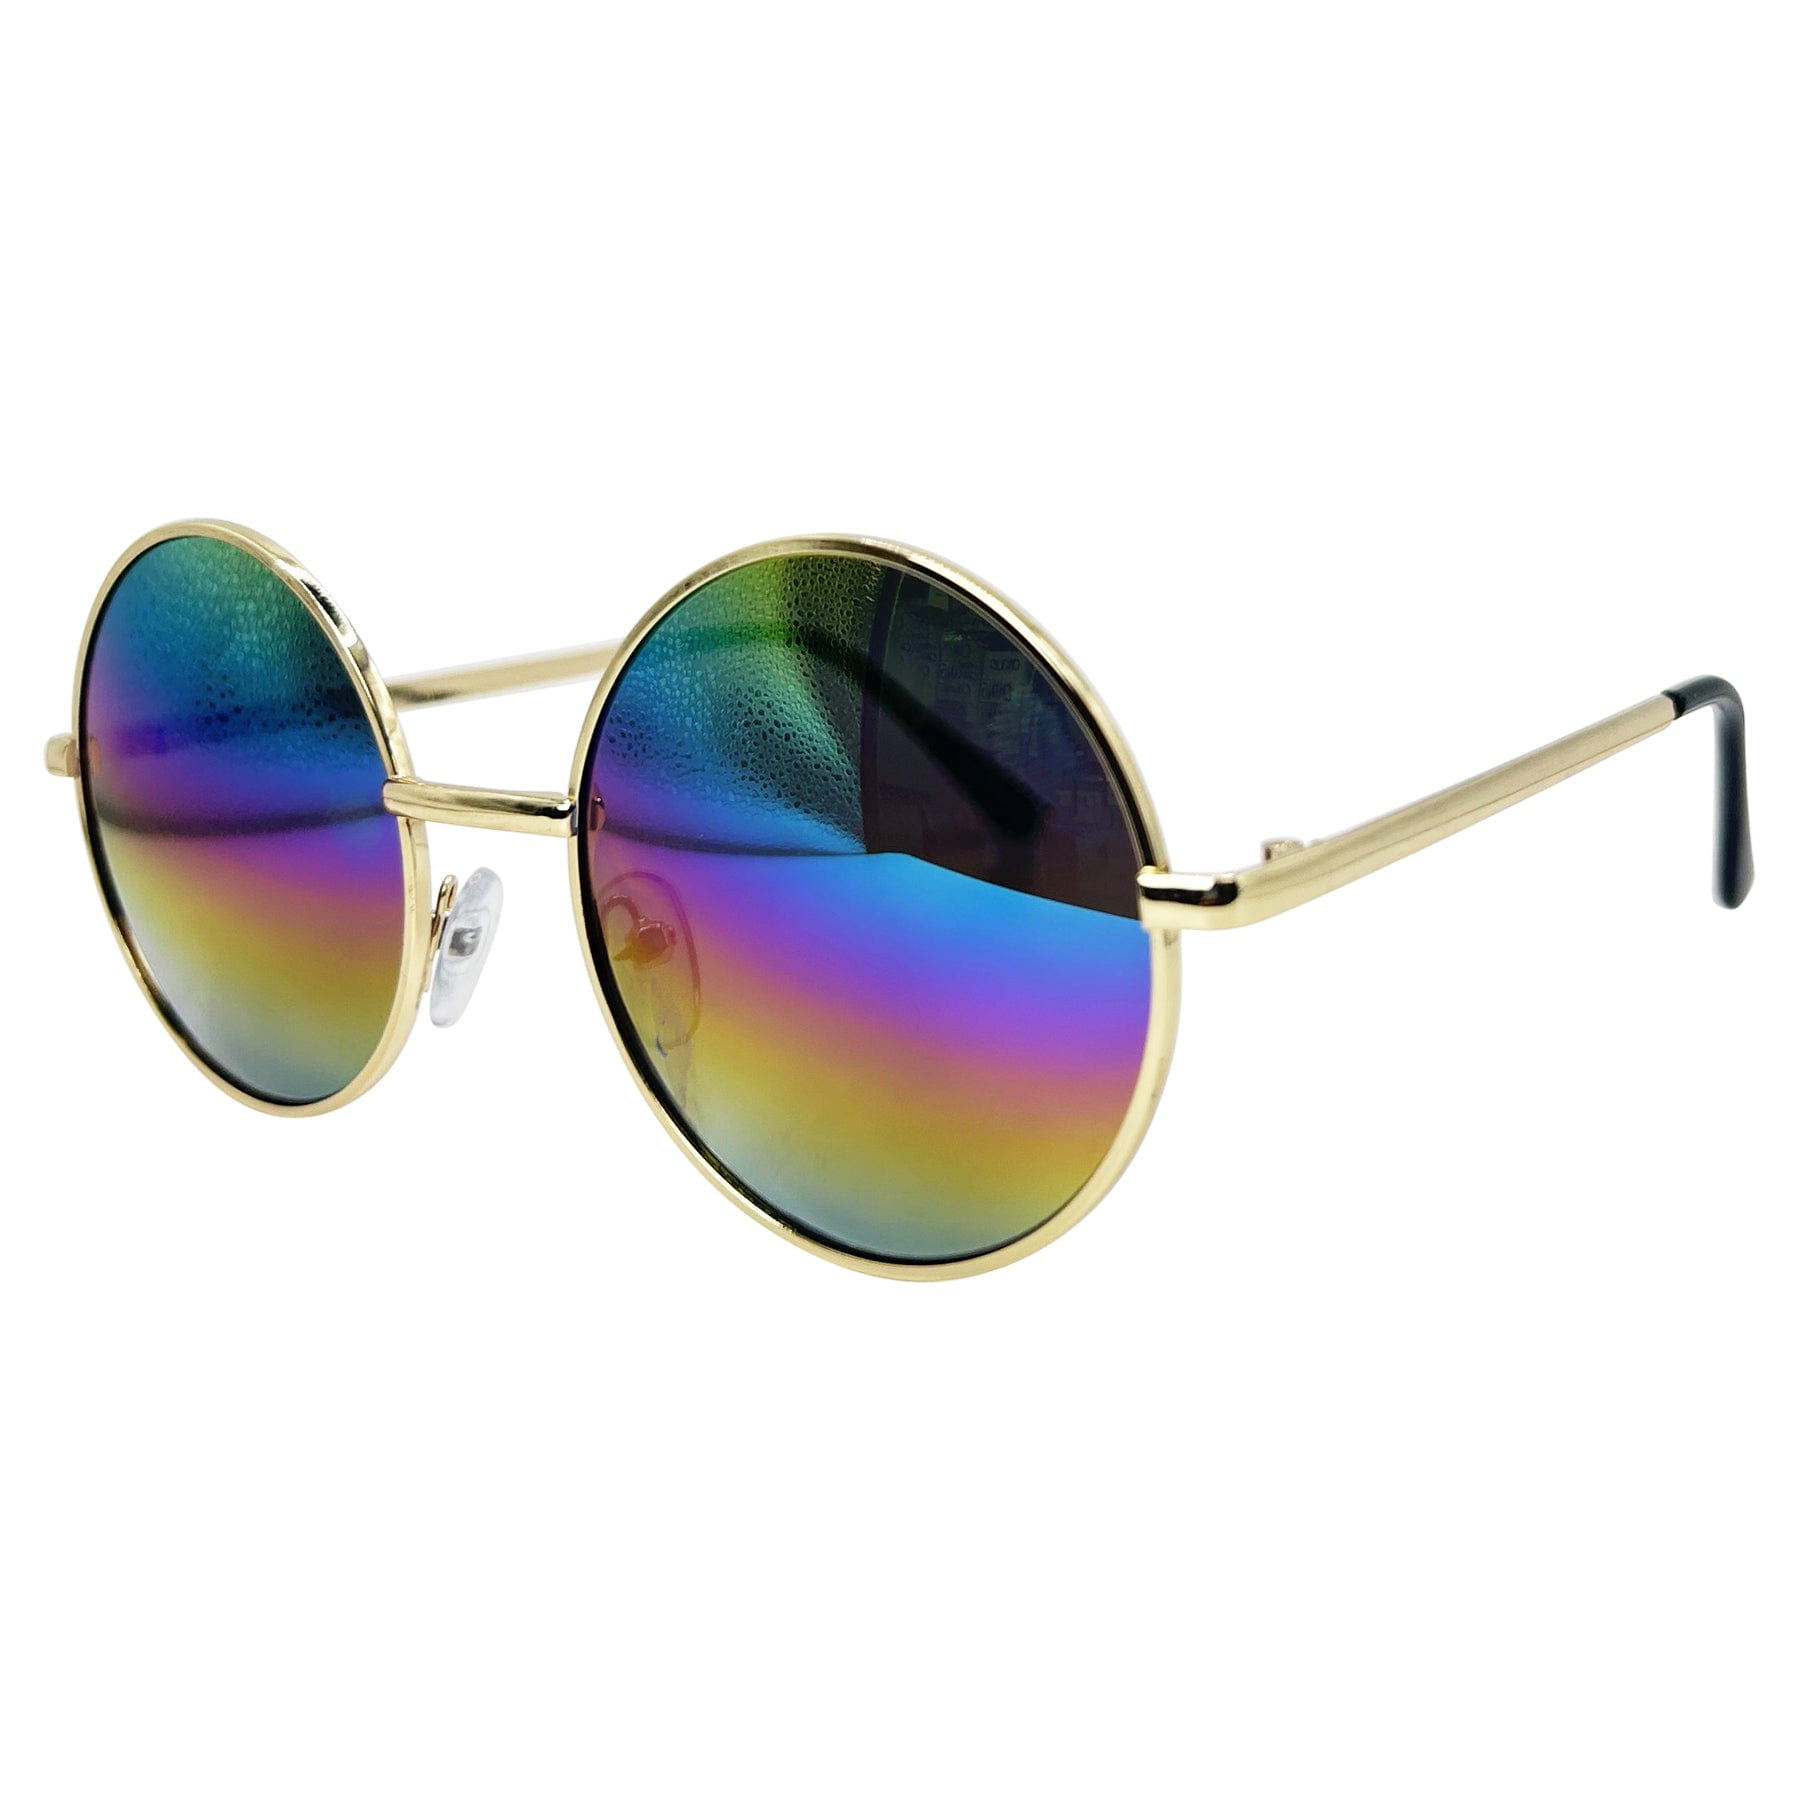 retro sunglasses with a gold thin frame and mirrored lens